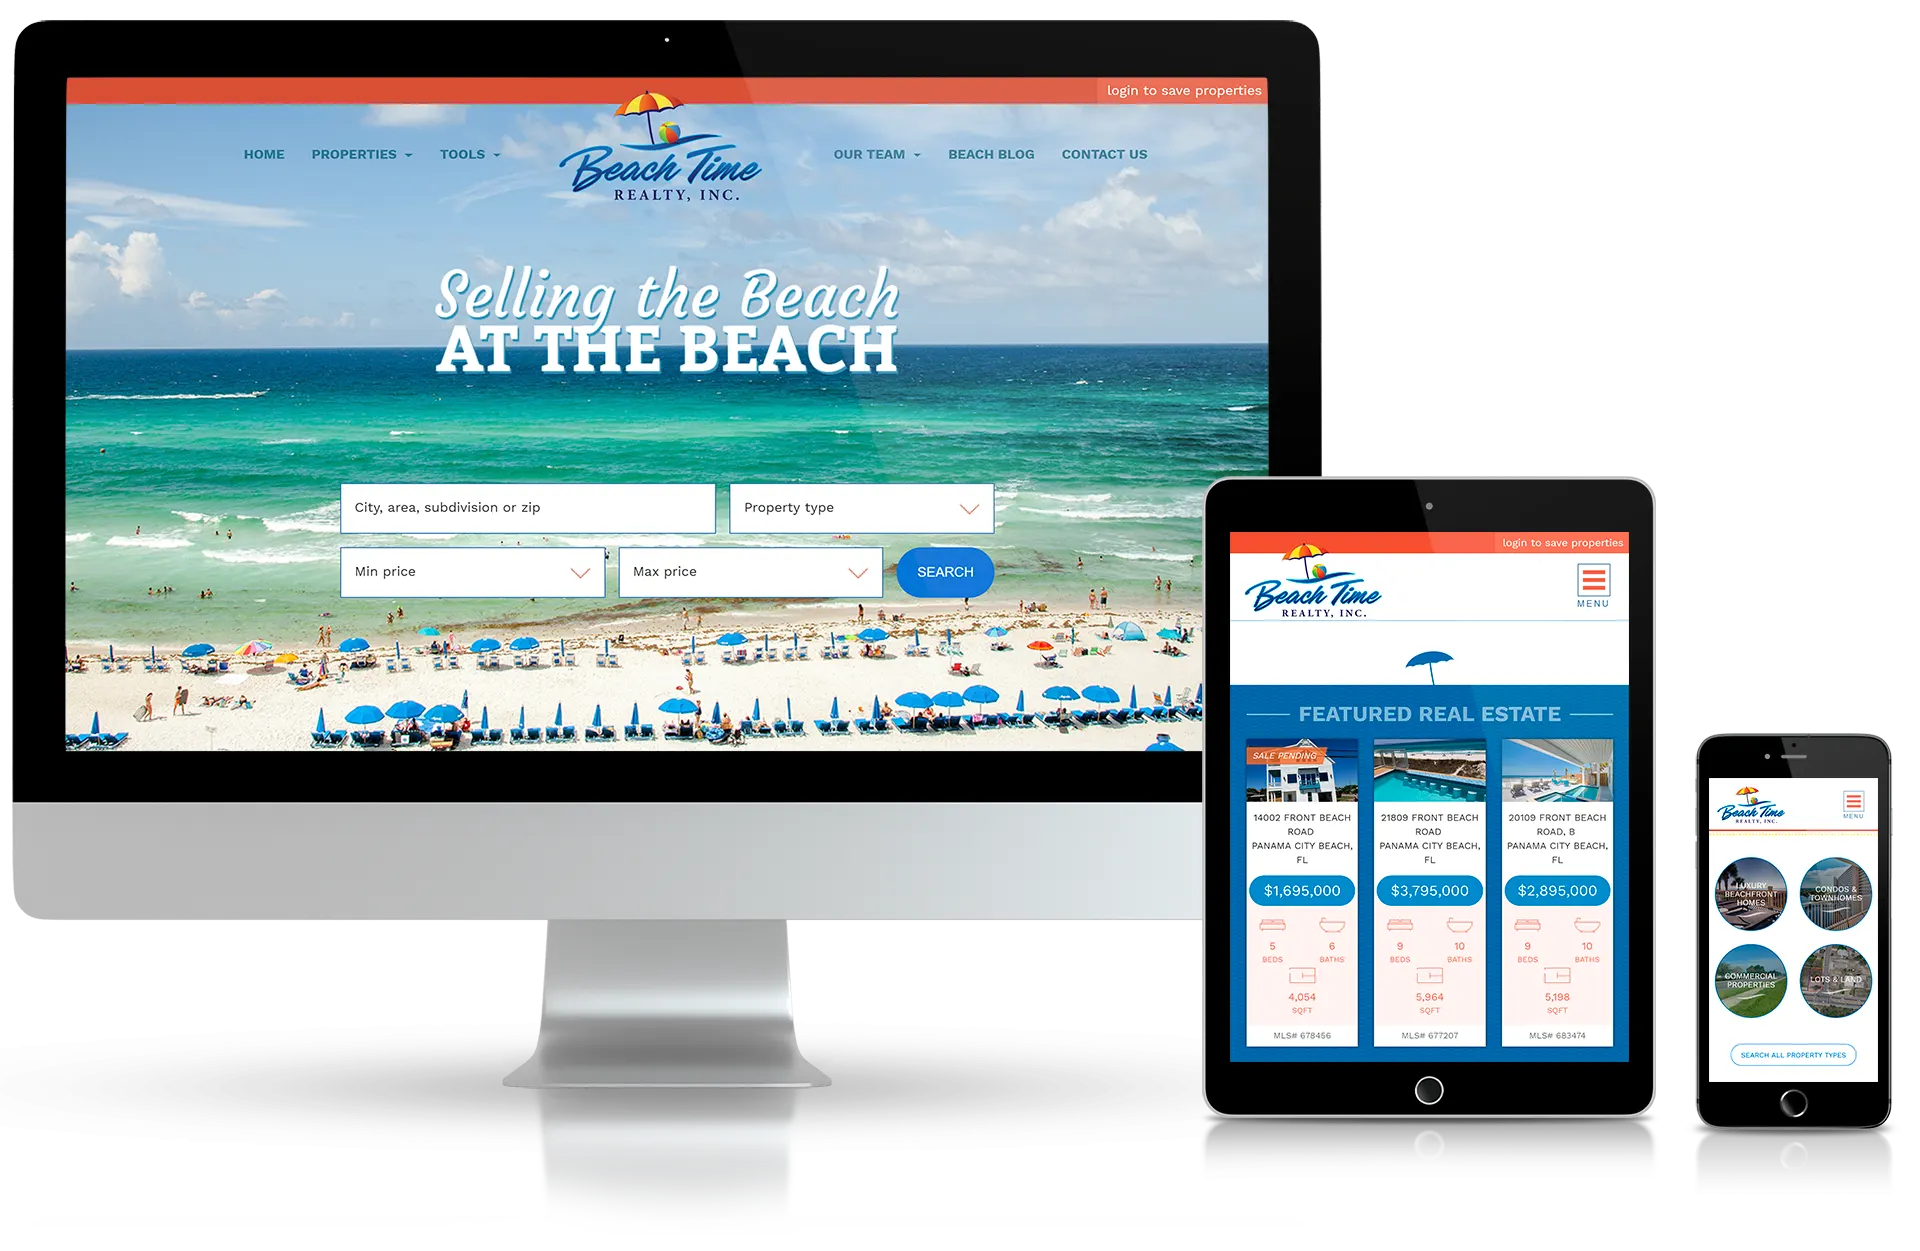 Website design for Beach Time Realty